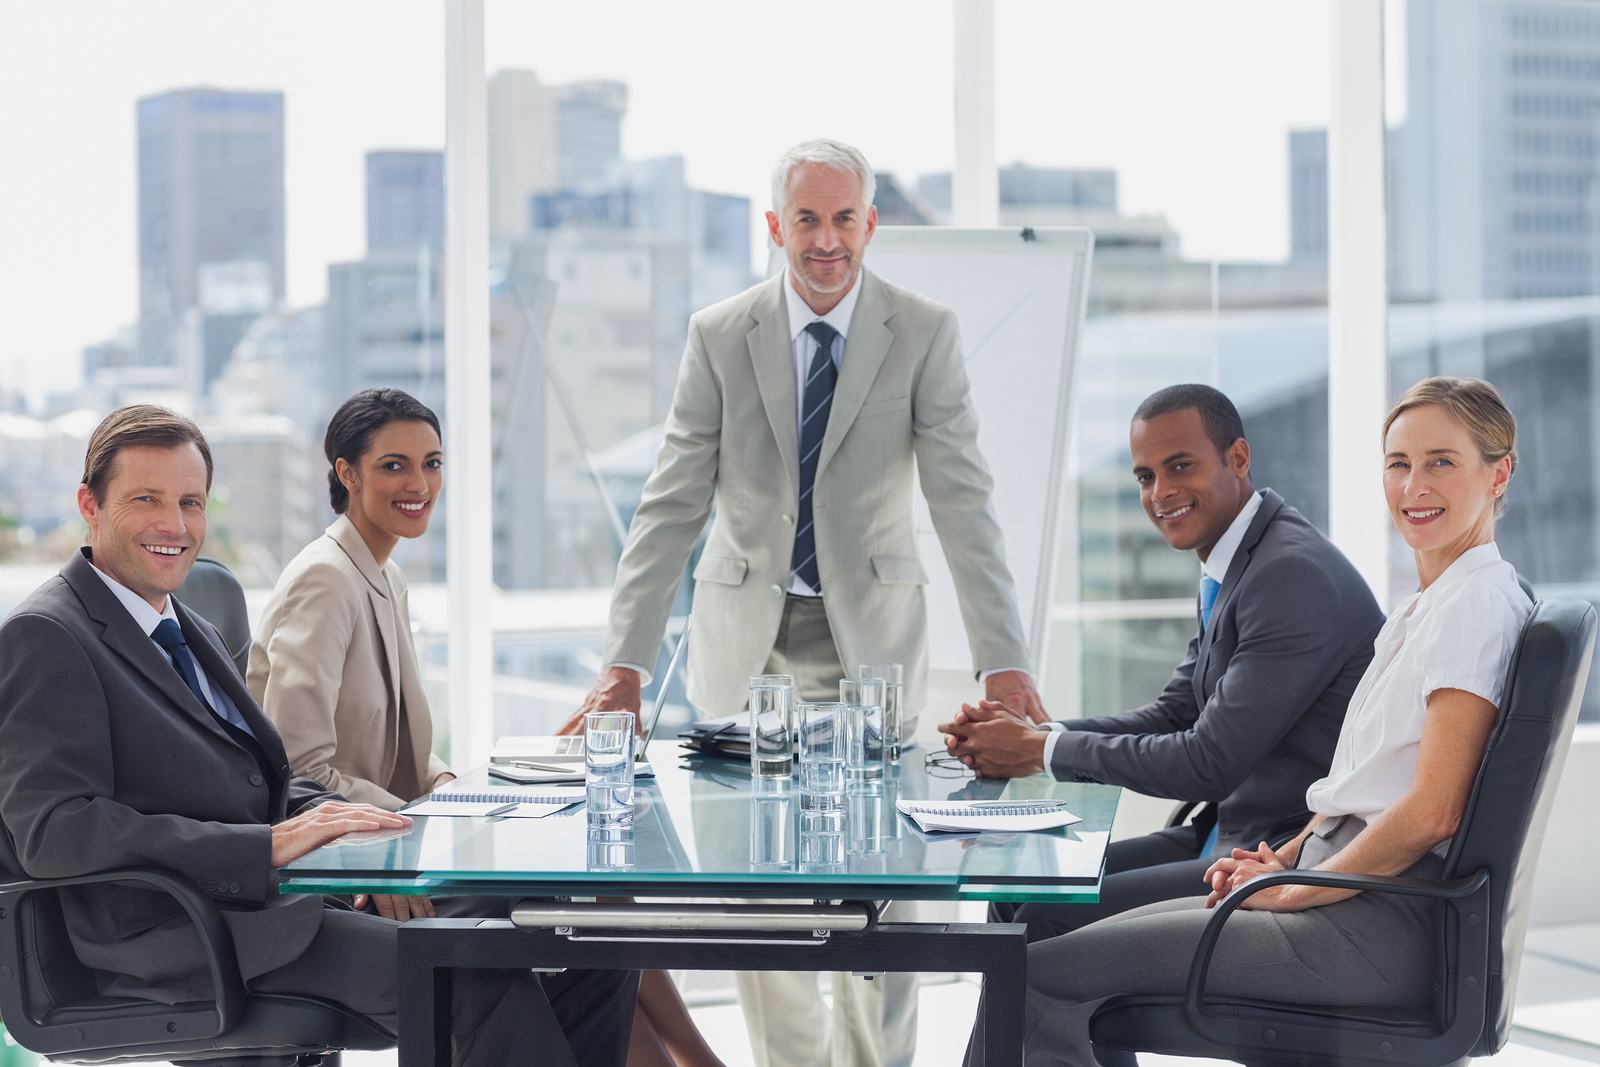 6 Qualities That All Great Leaders Exhibit